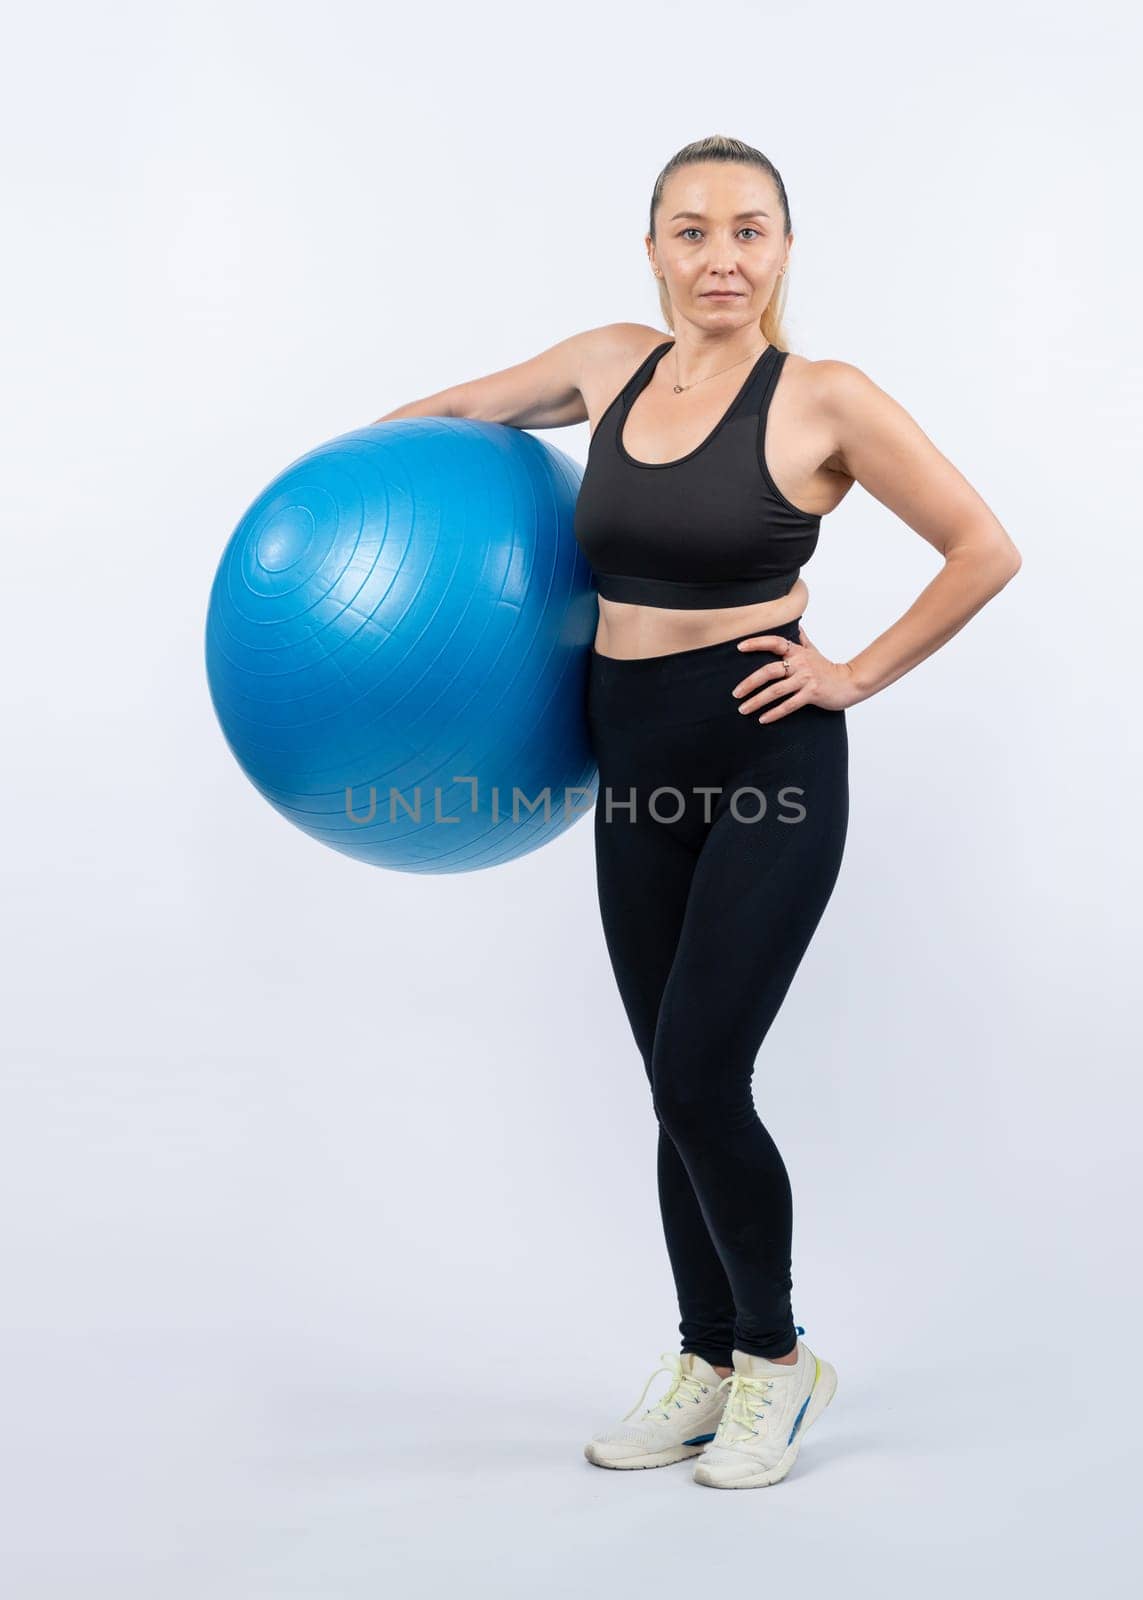 Full body length shot athletic and sporty senior woman with fitness exercising ball on isolated background. Healthy active and body care lifestyle after retirement. Clout